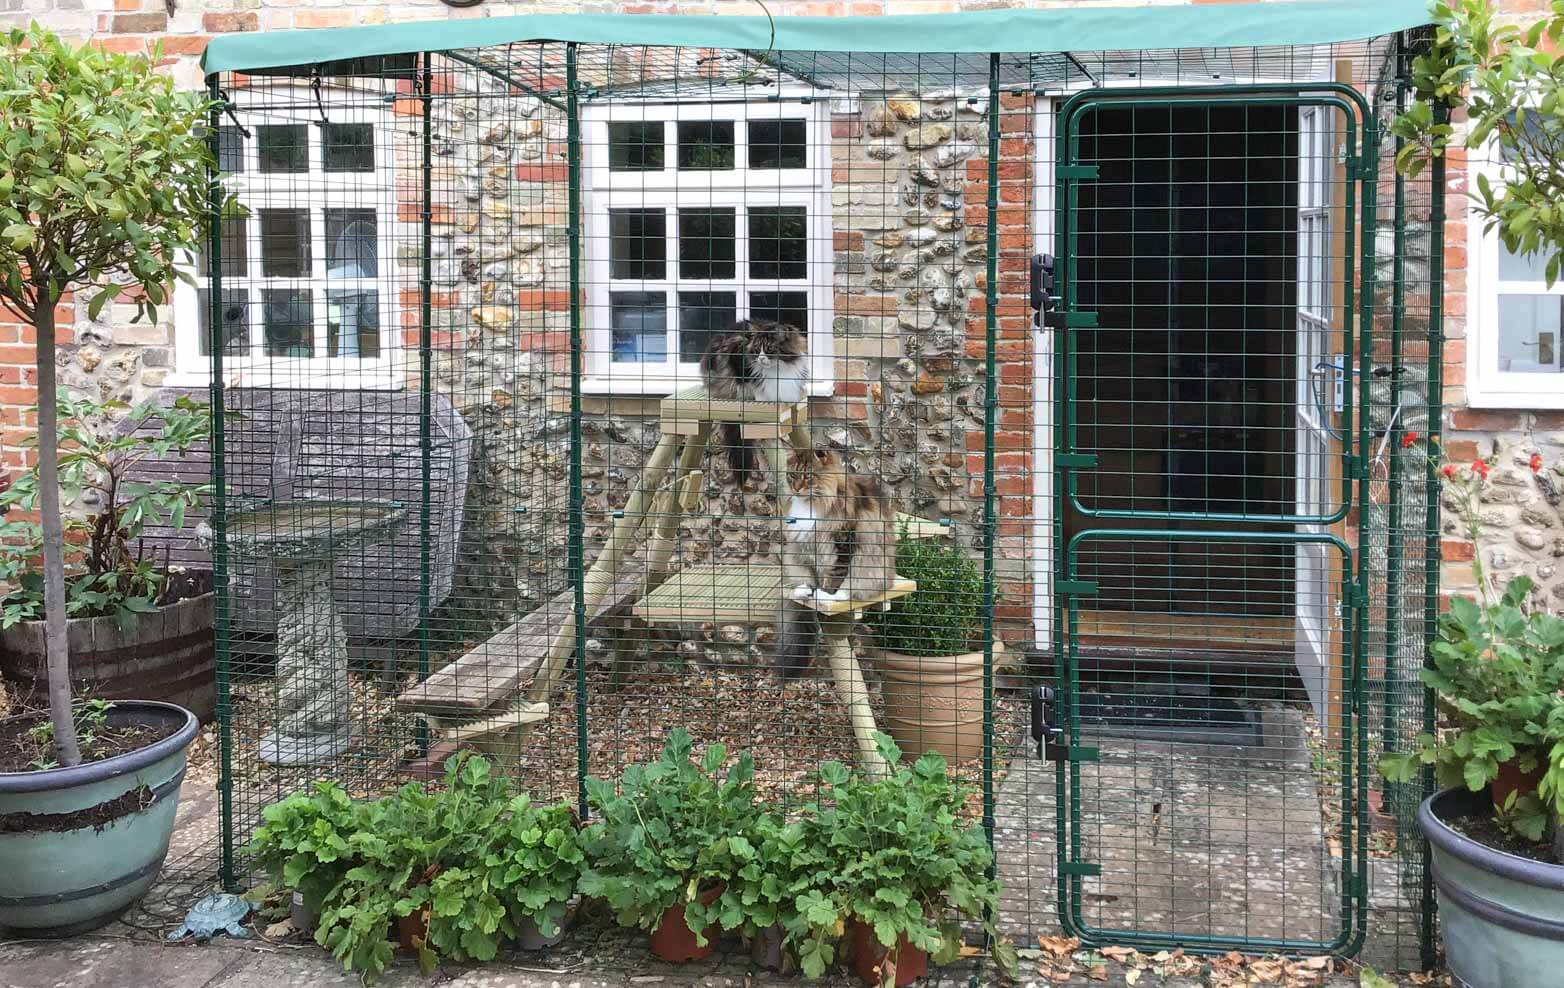 cats playing in an outdoor catio